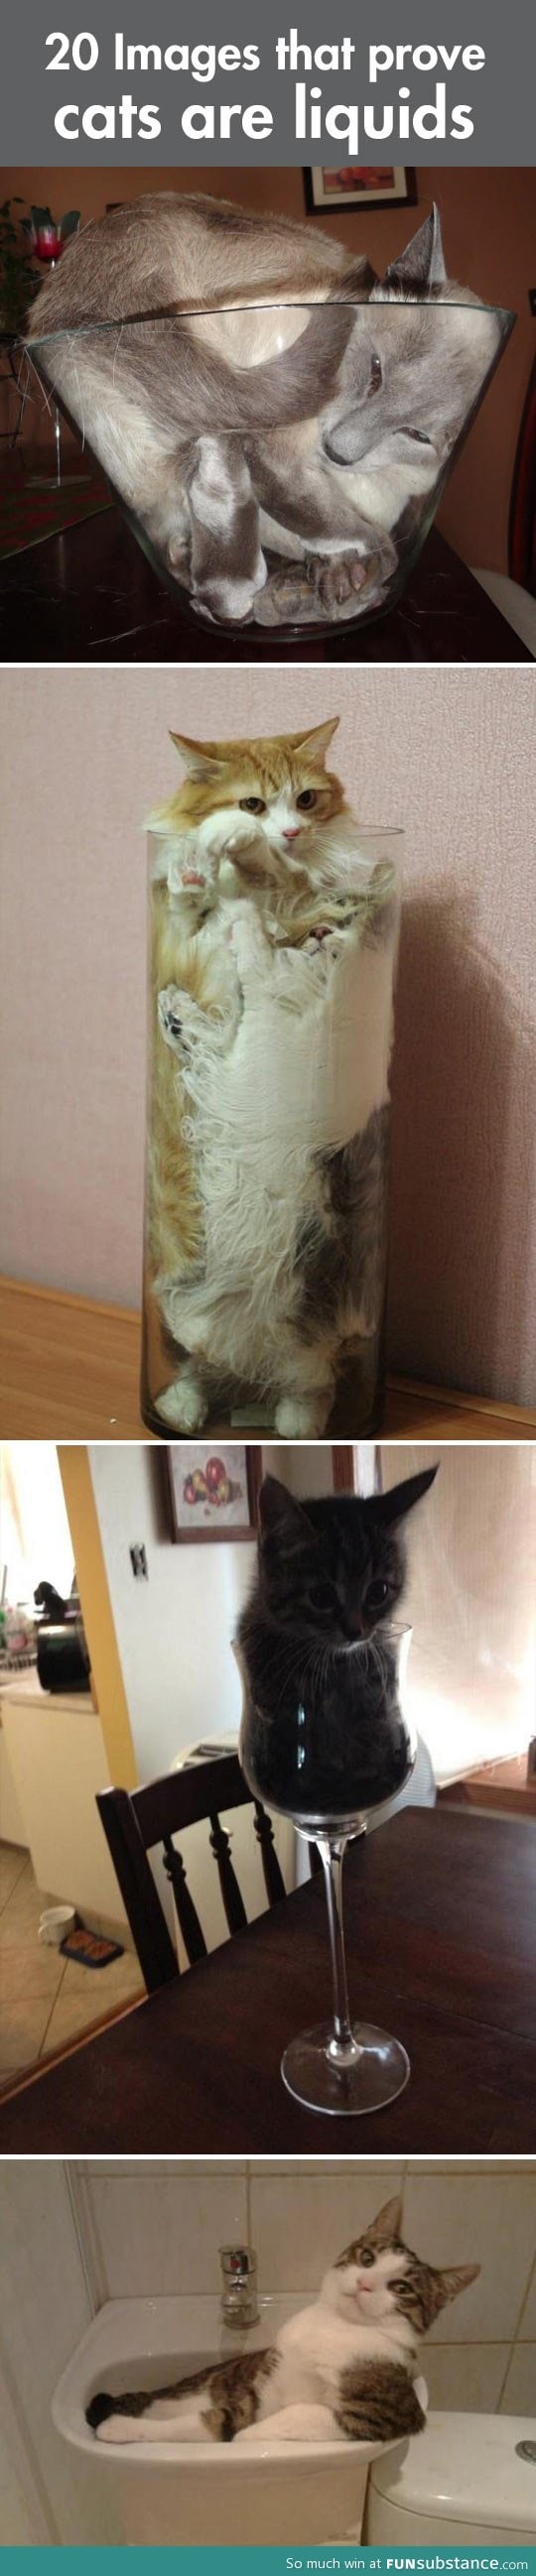 Why cats are liquids